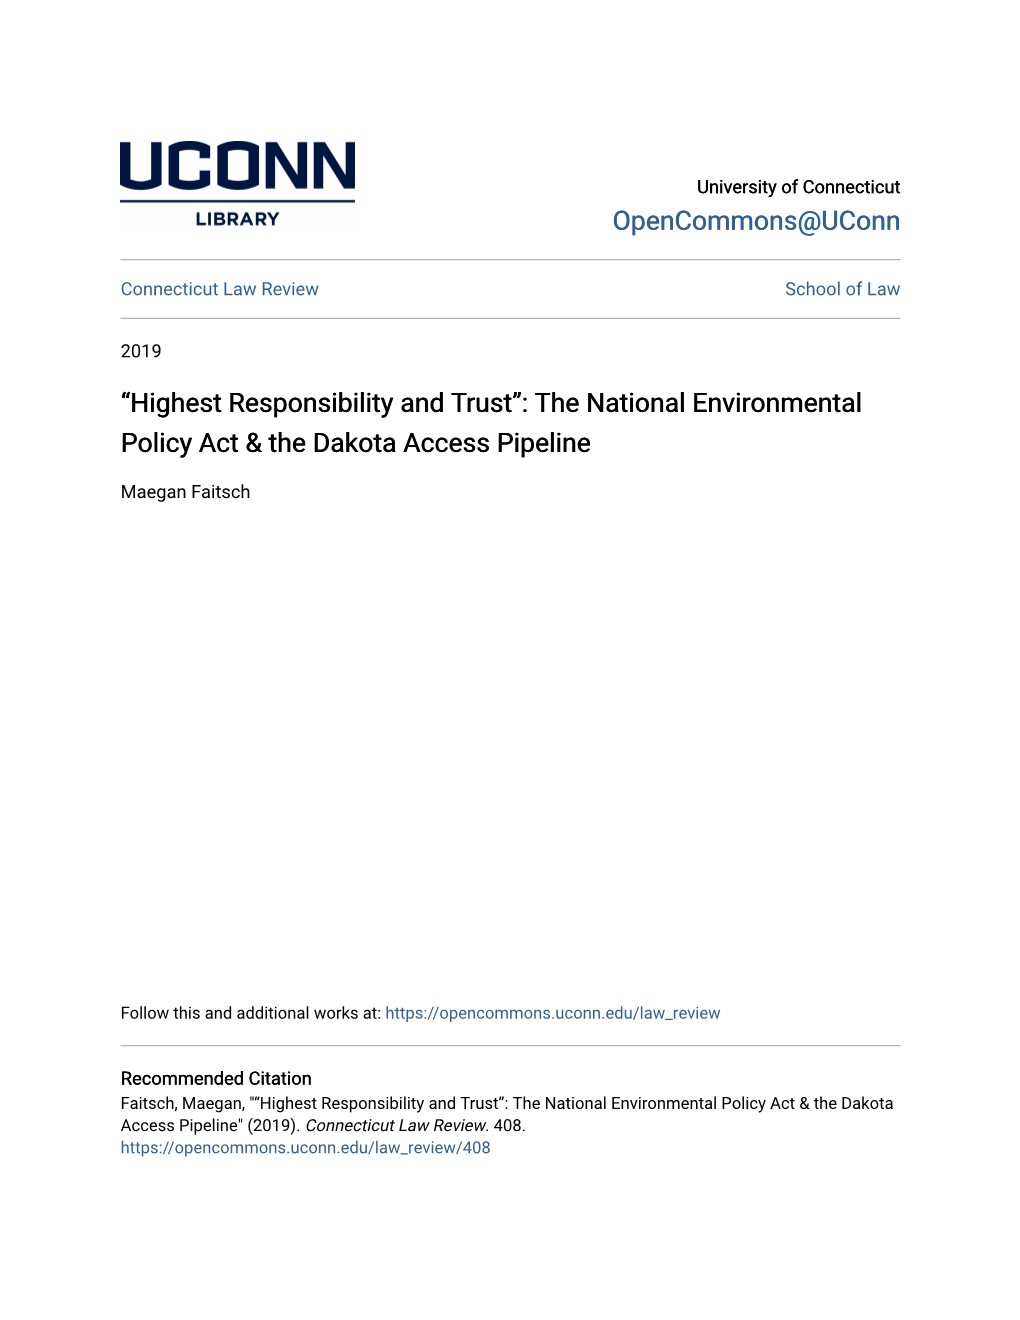 The National Environmental Policy Act & The